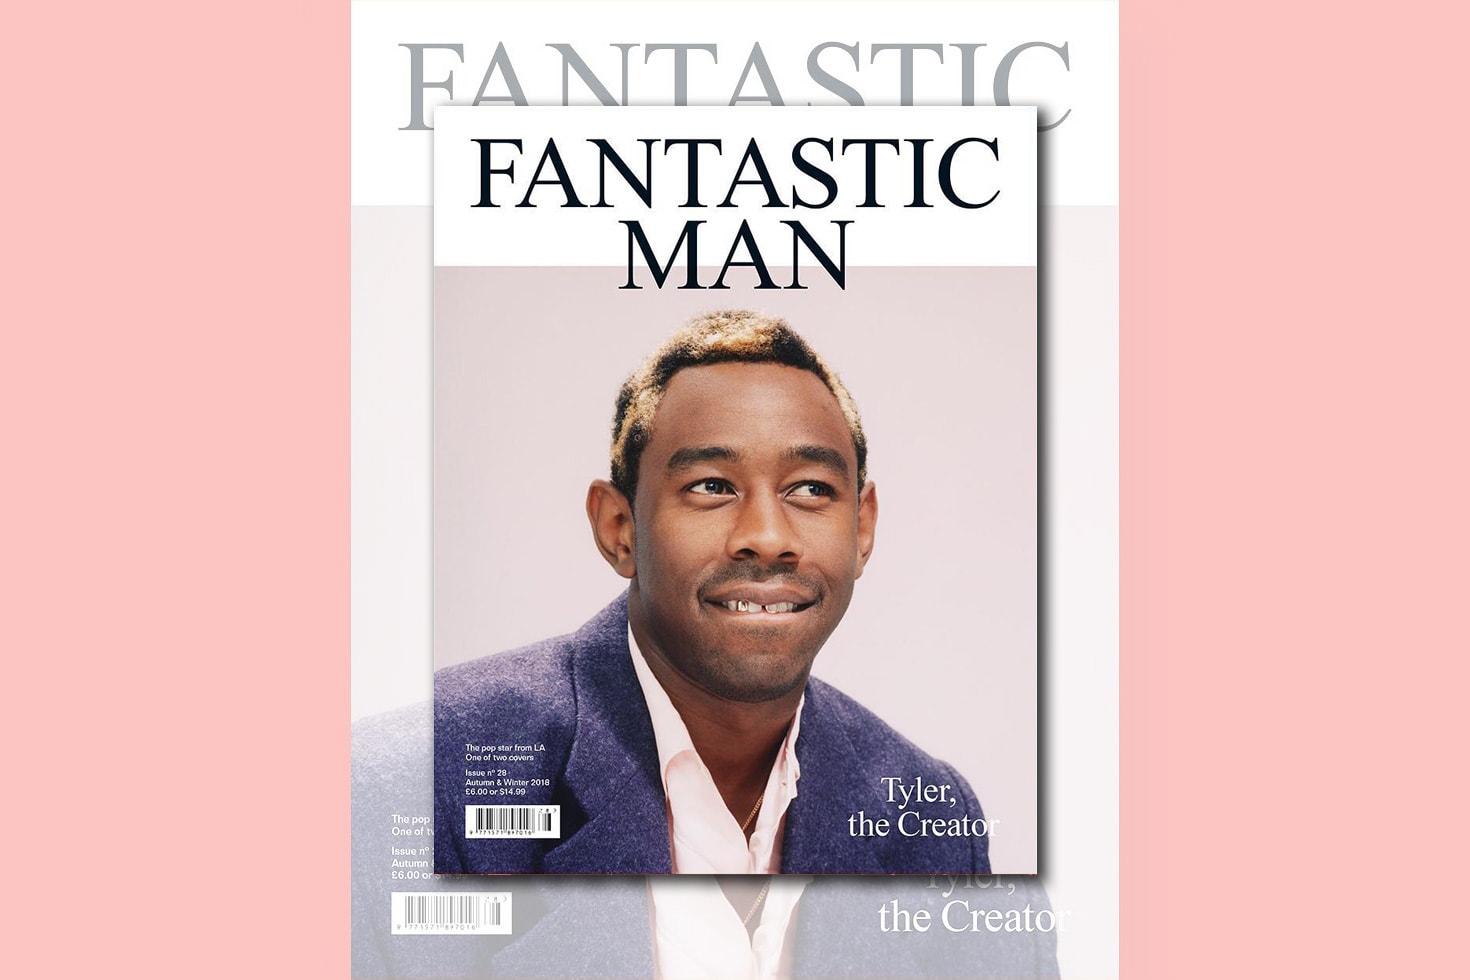 Fantastic Man tyler the creator cover magazine issue  fall winter 2018 Mark Peckmezian september 21 release date story article feature 28